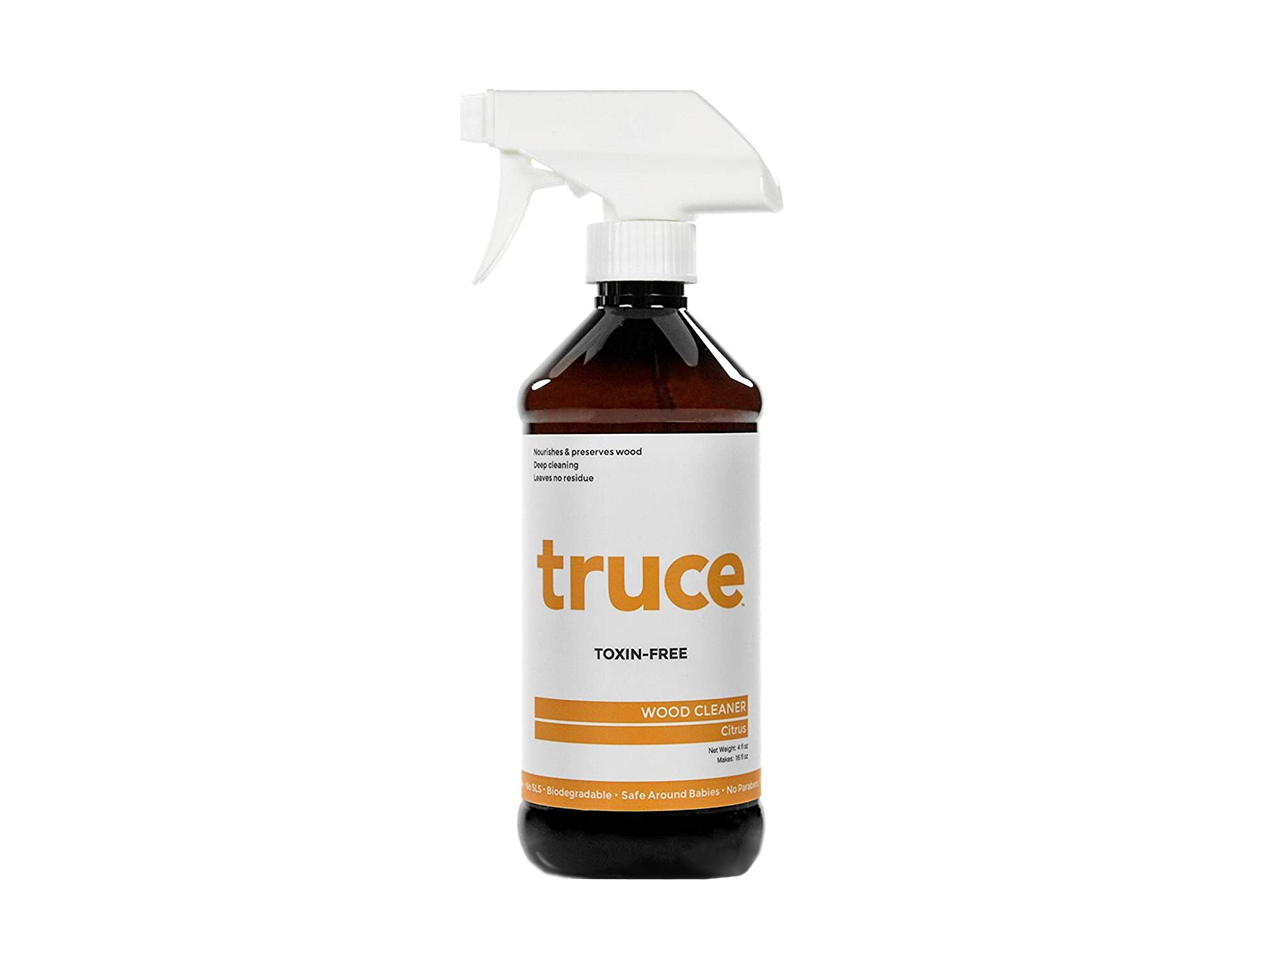 Eco-friendly cleaners, brown truce wood cleaner spray bottle